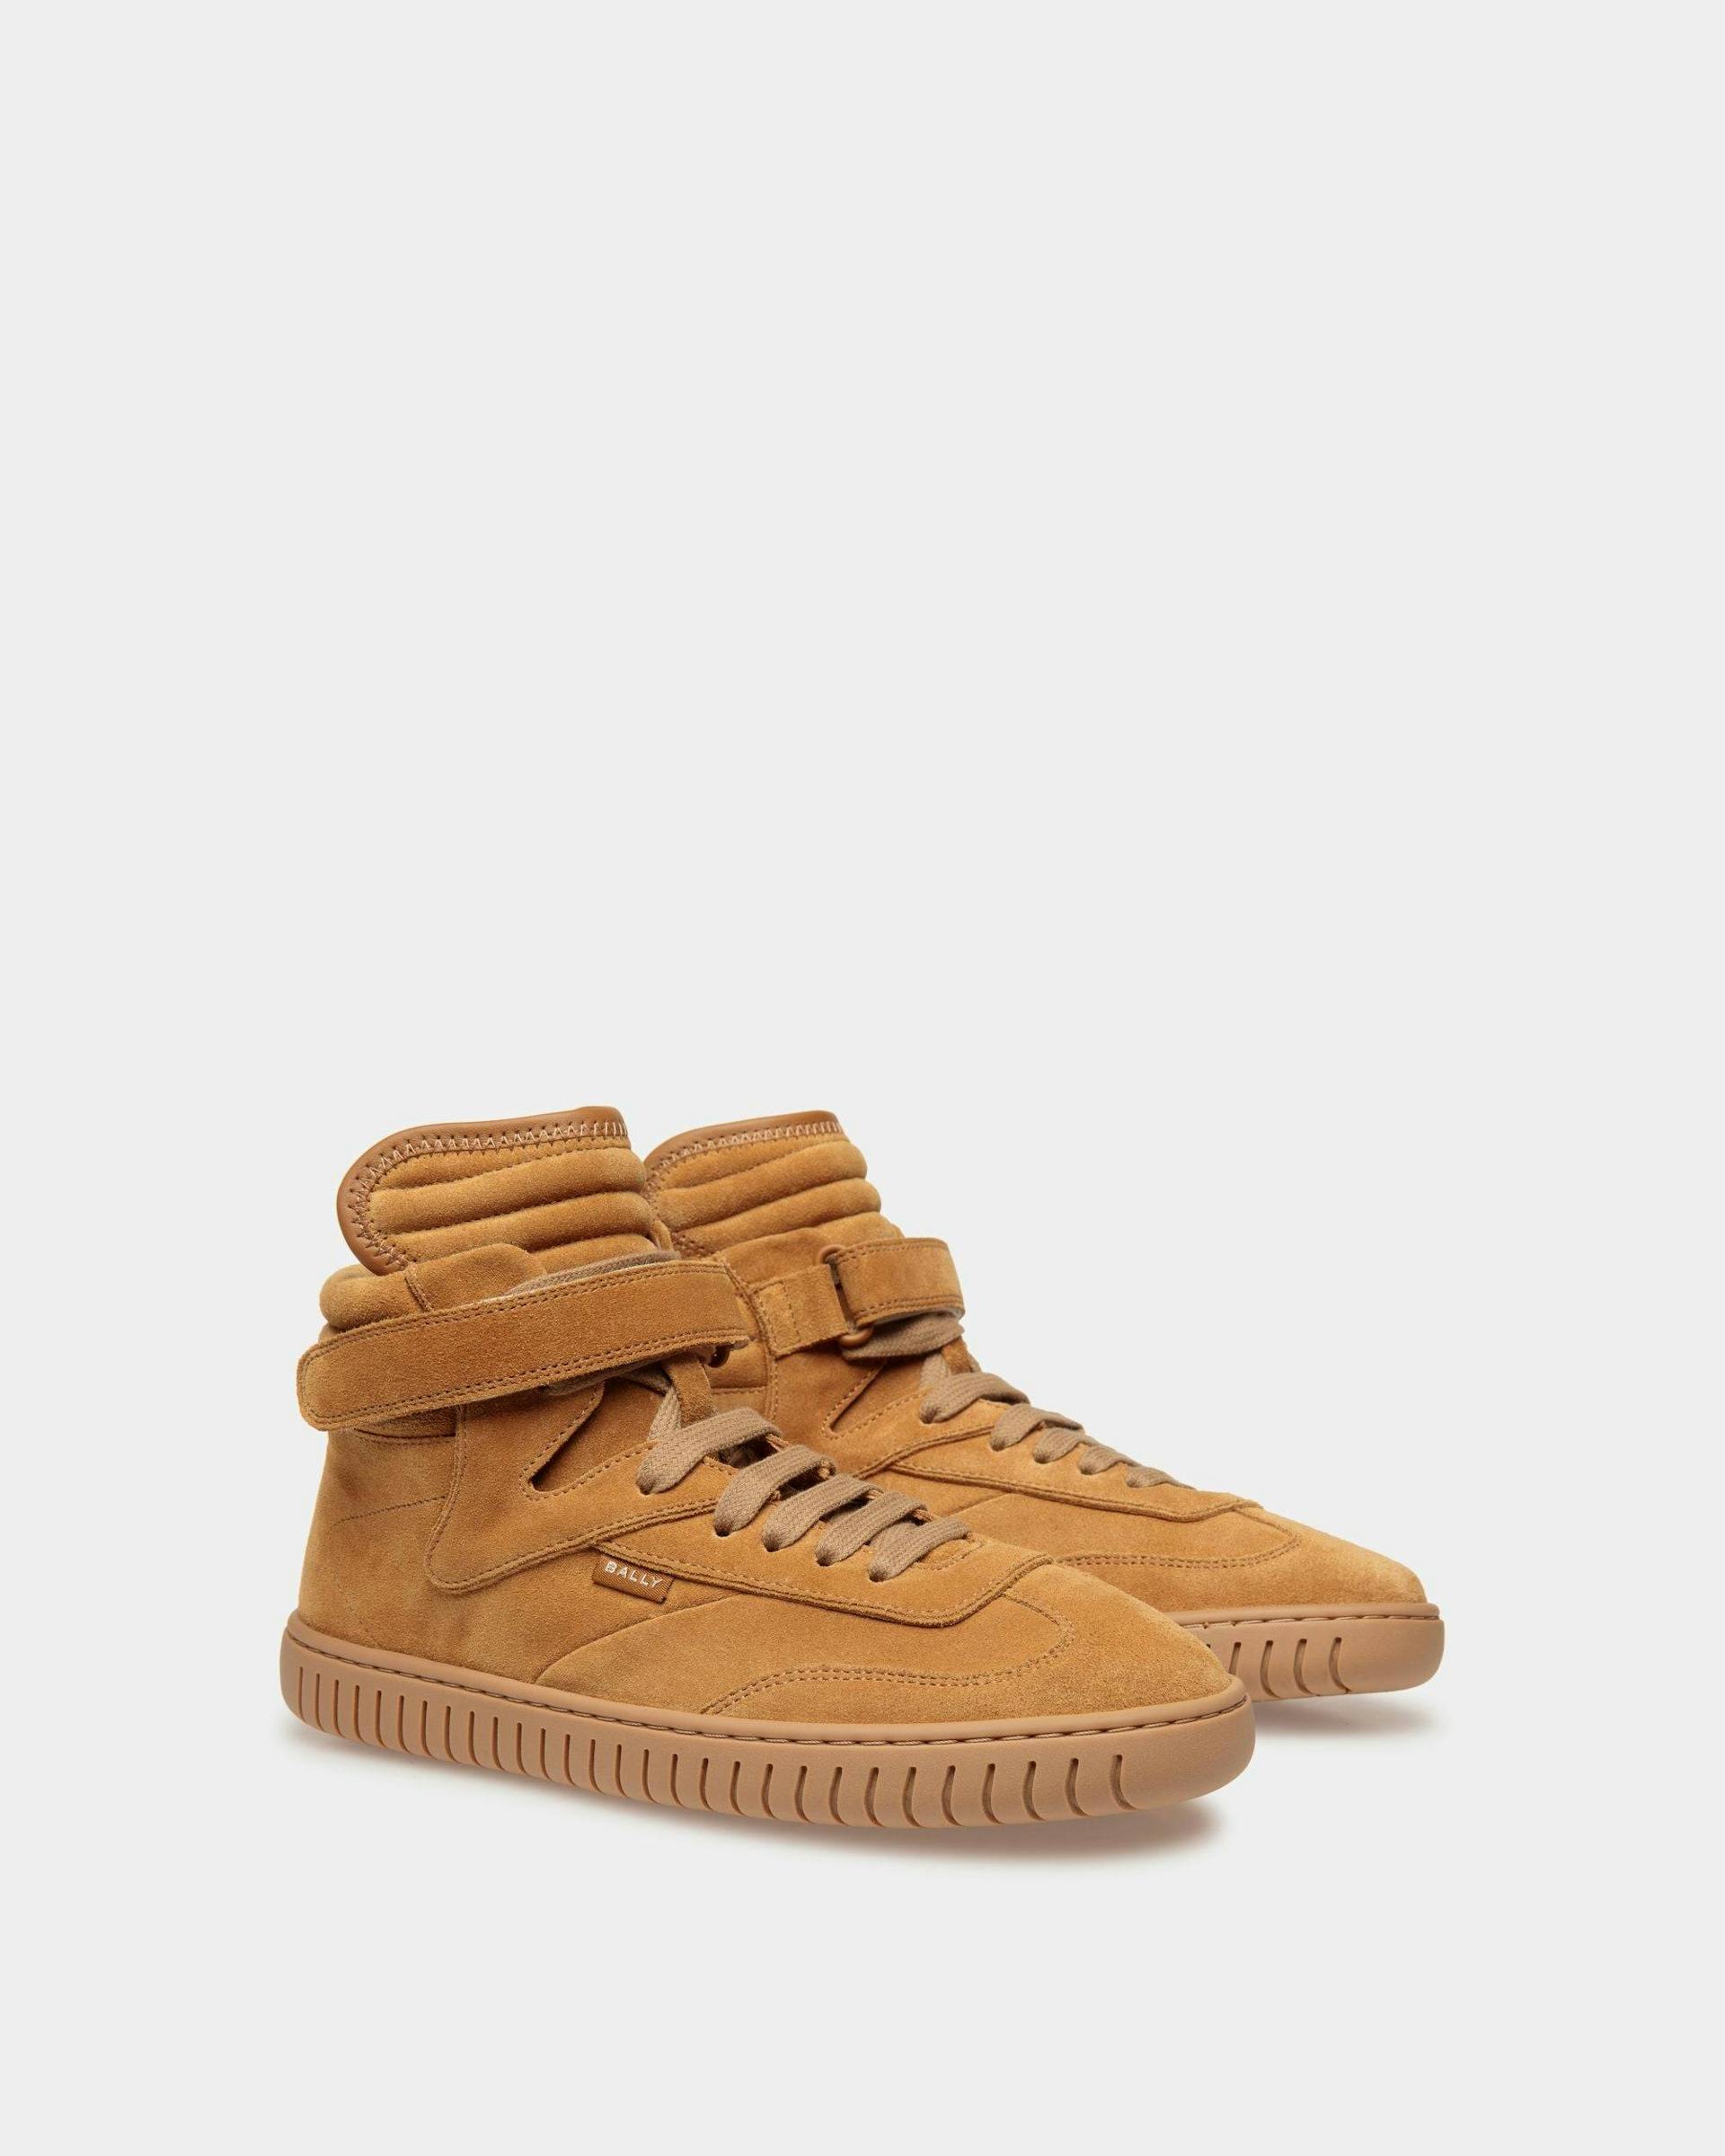 Player Sneakers In Desert And Amber Leather - Women's - Bally - 02